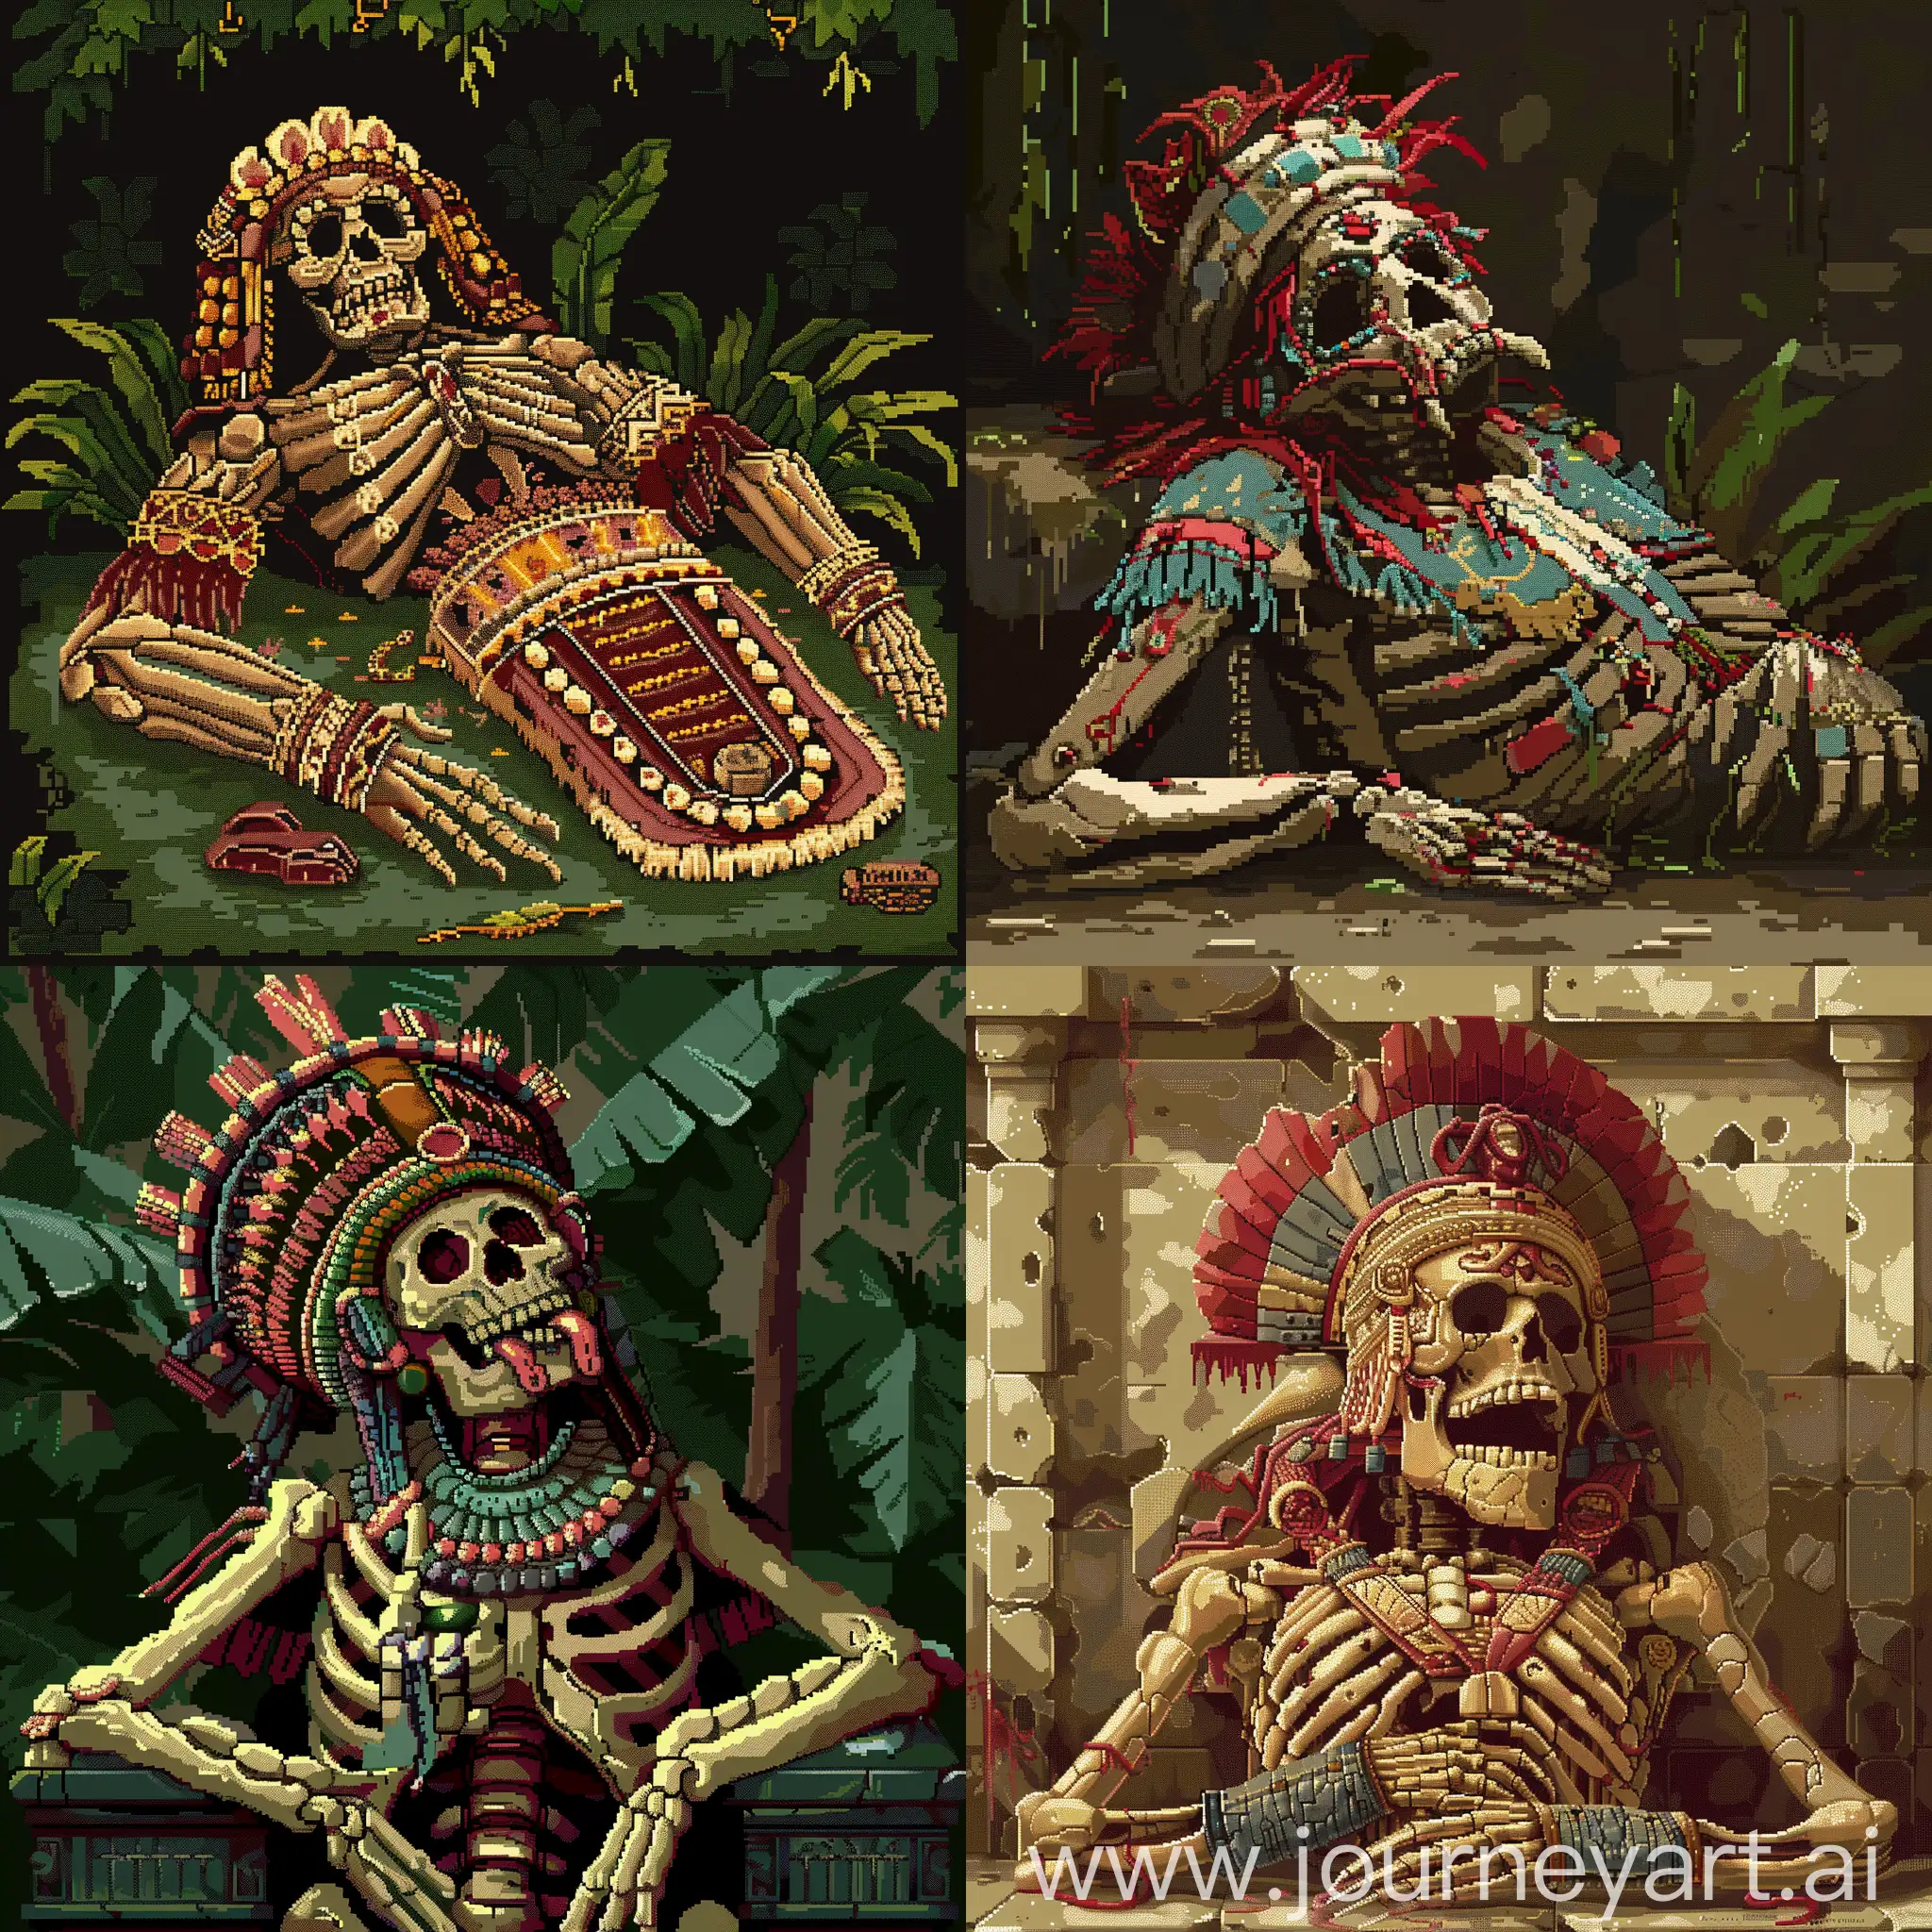 the animated corpse of a large ancient king who ruled in Latin America 700 AD in the style of pixel art
